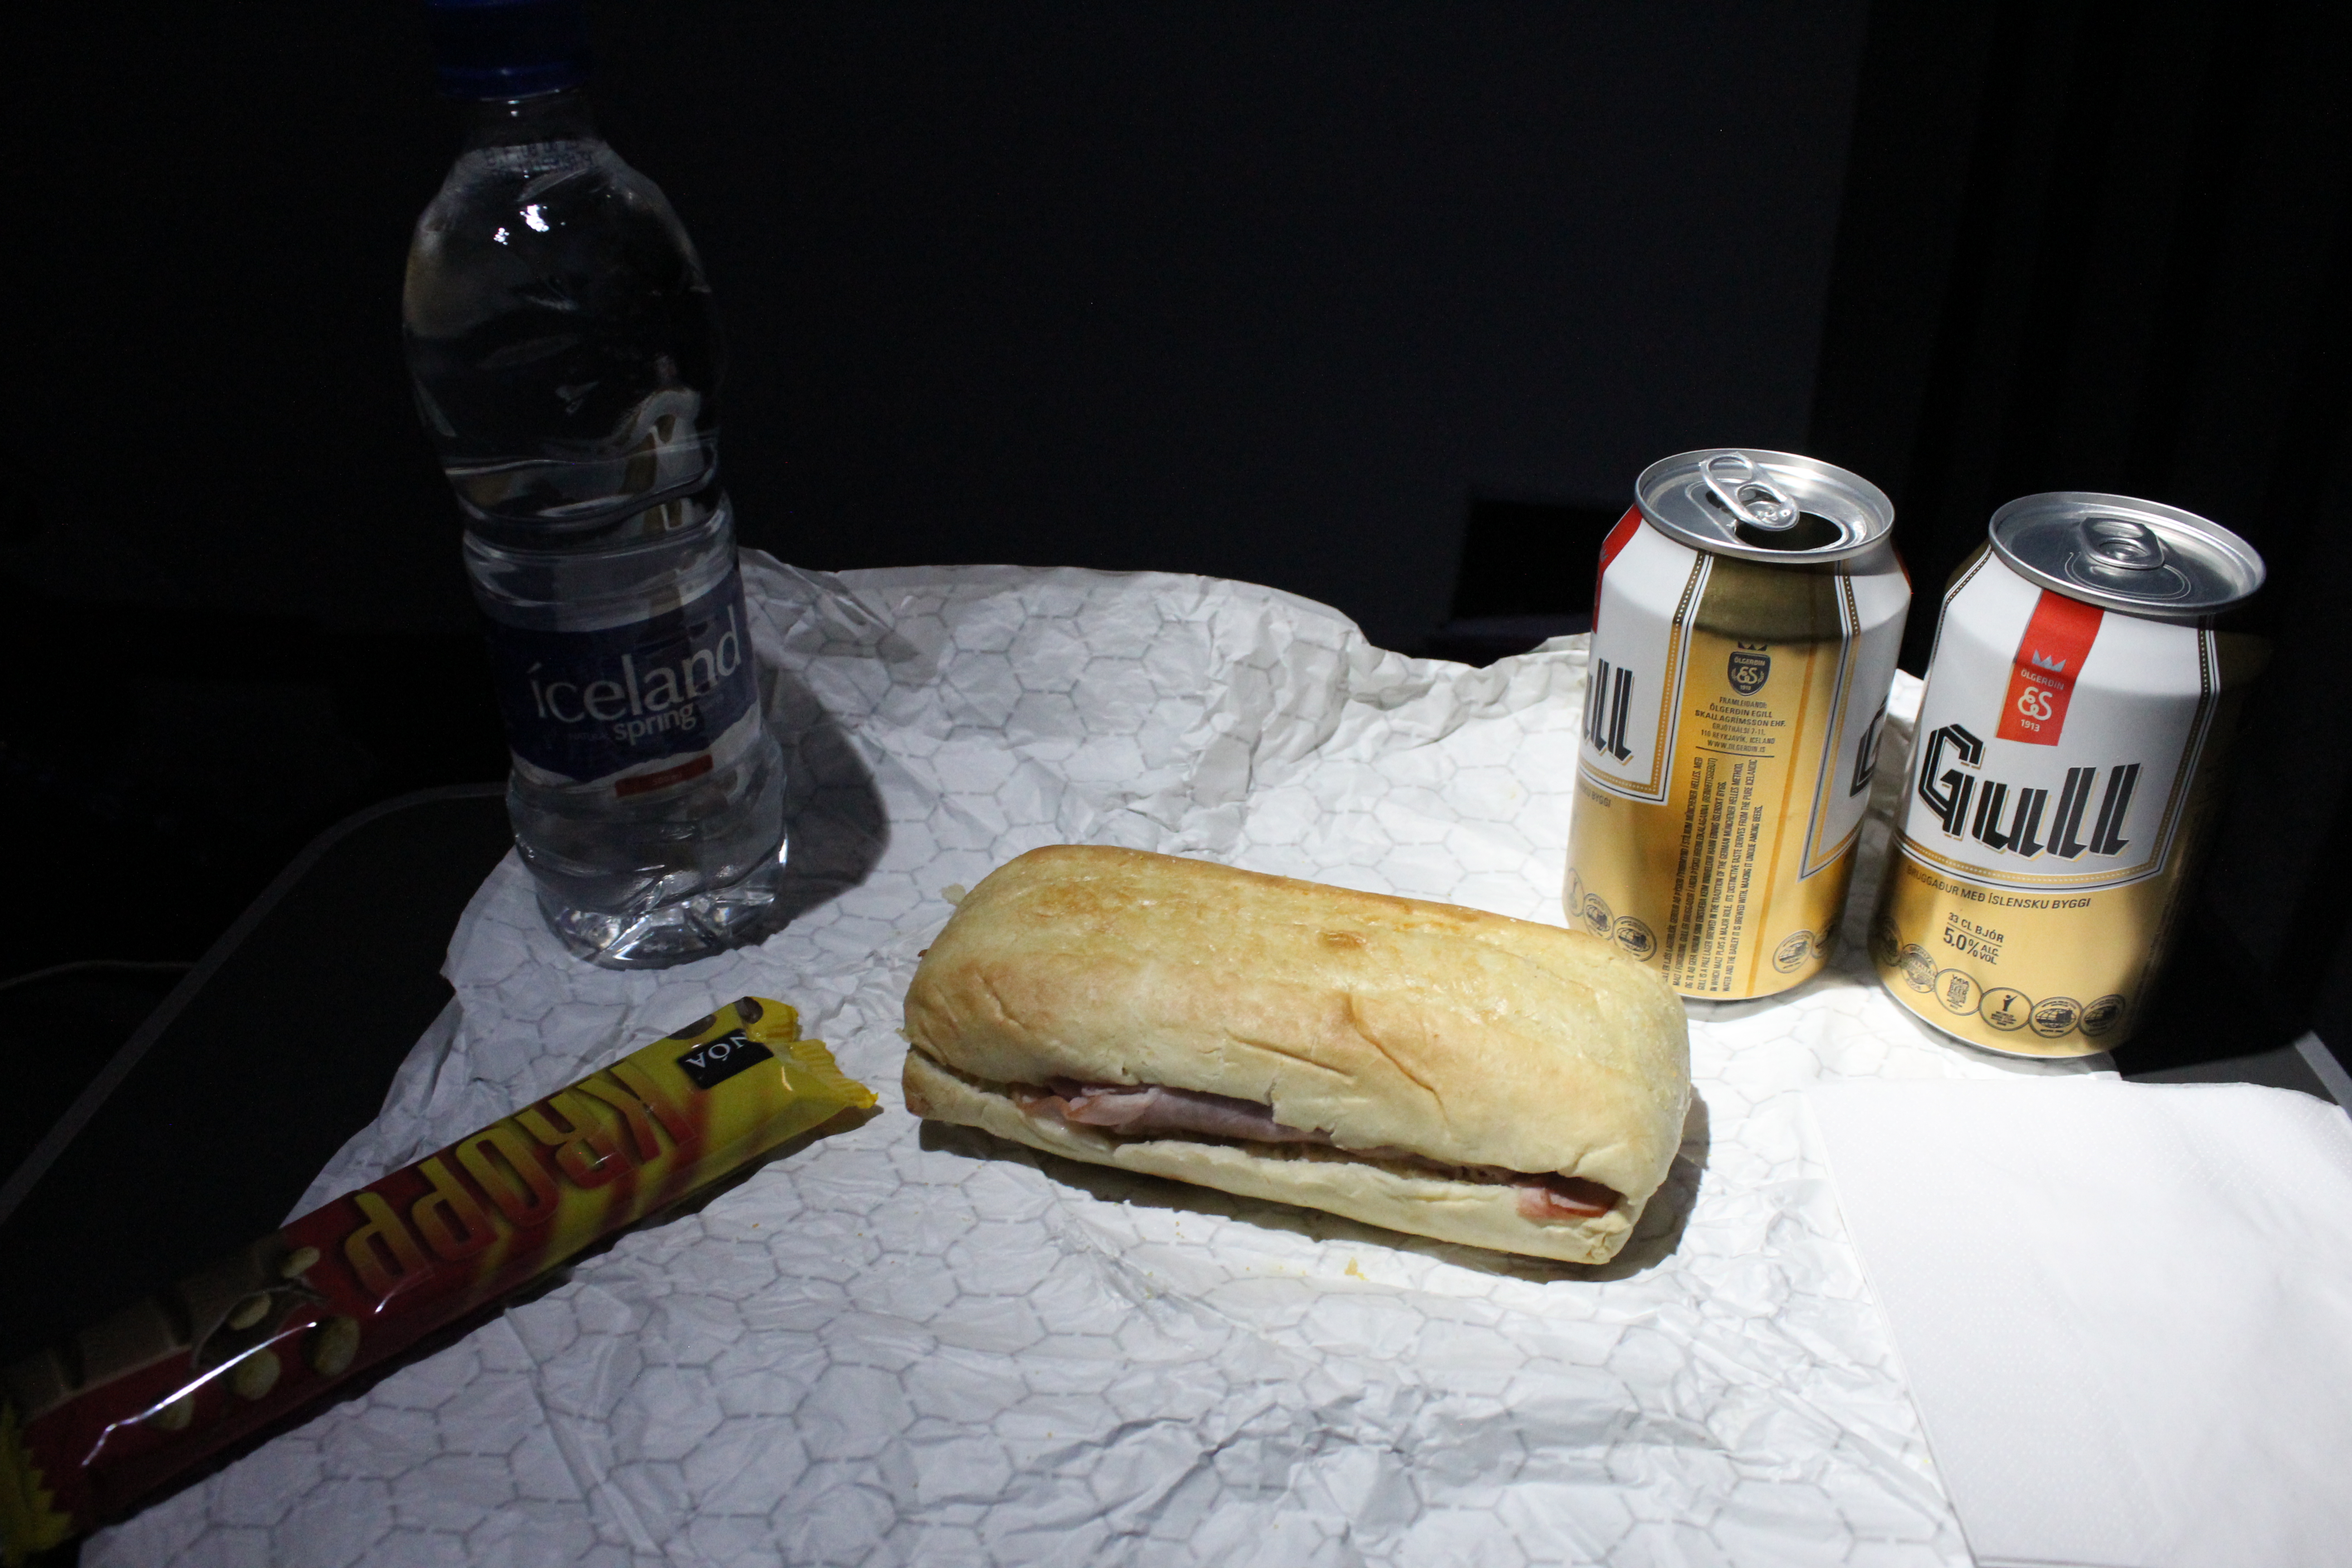 a sandwich and soda cans on a table